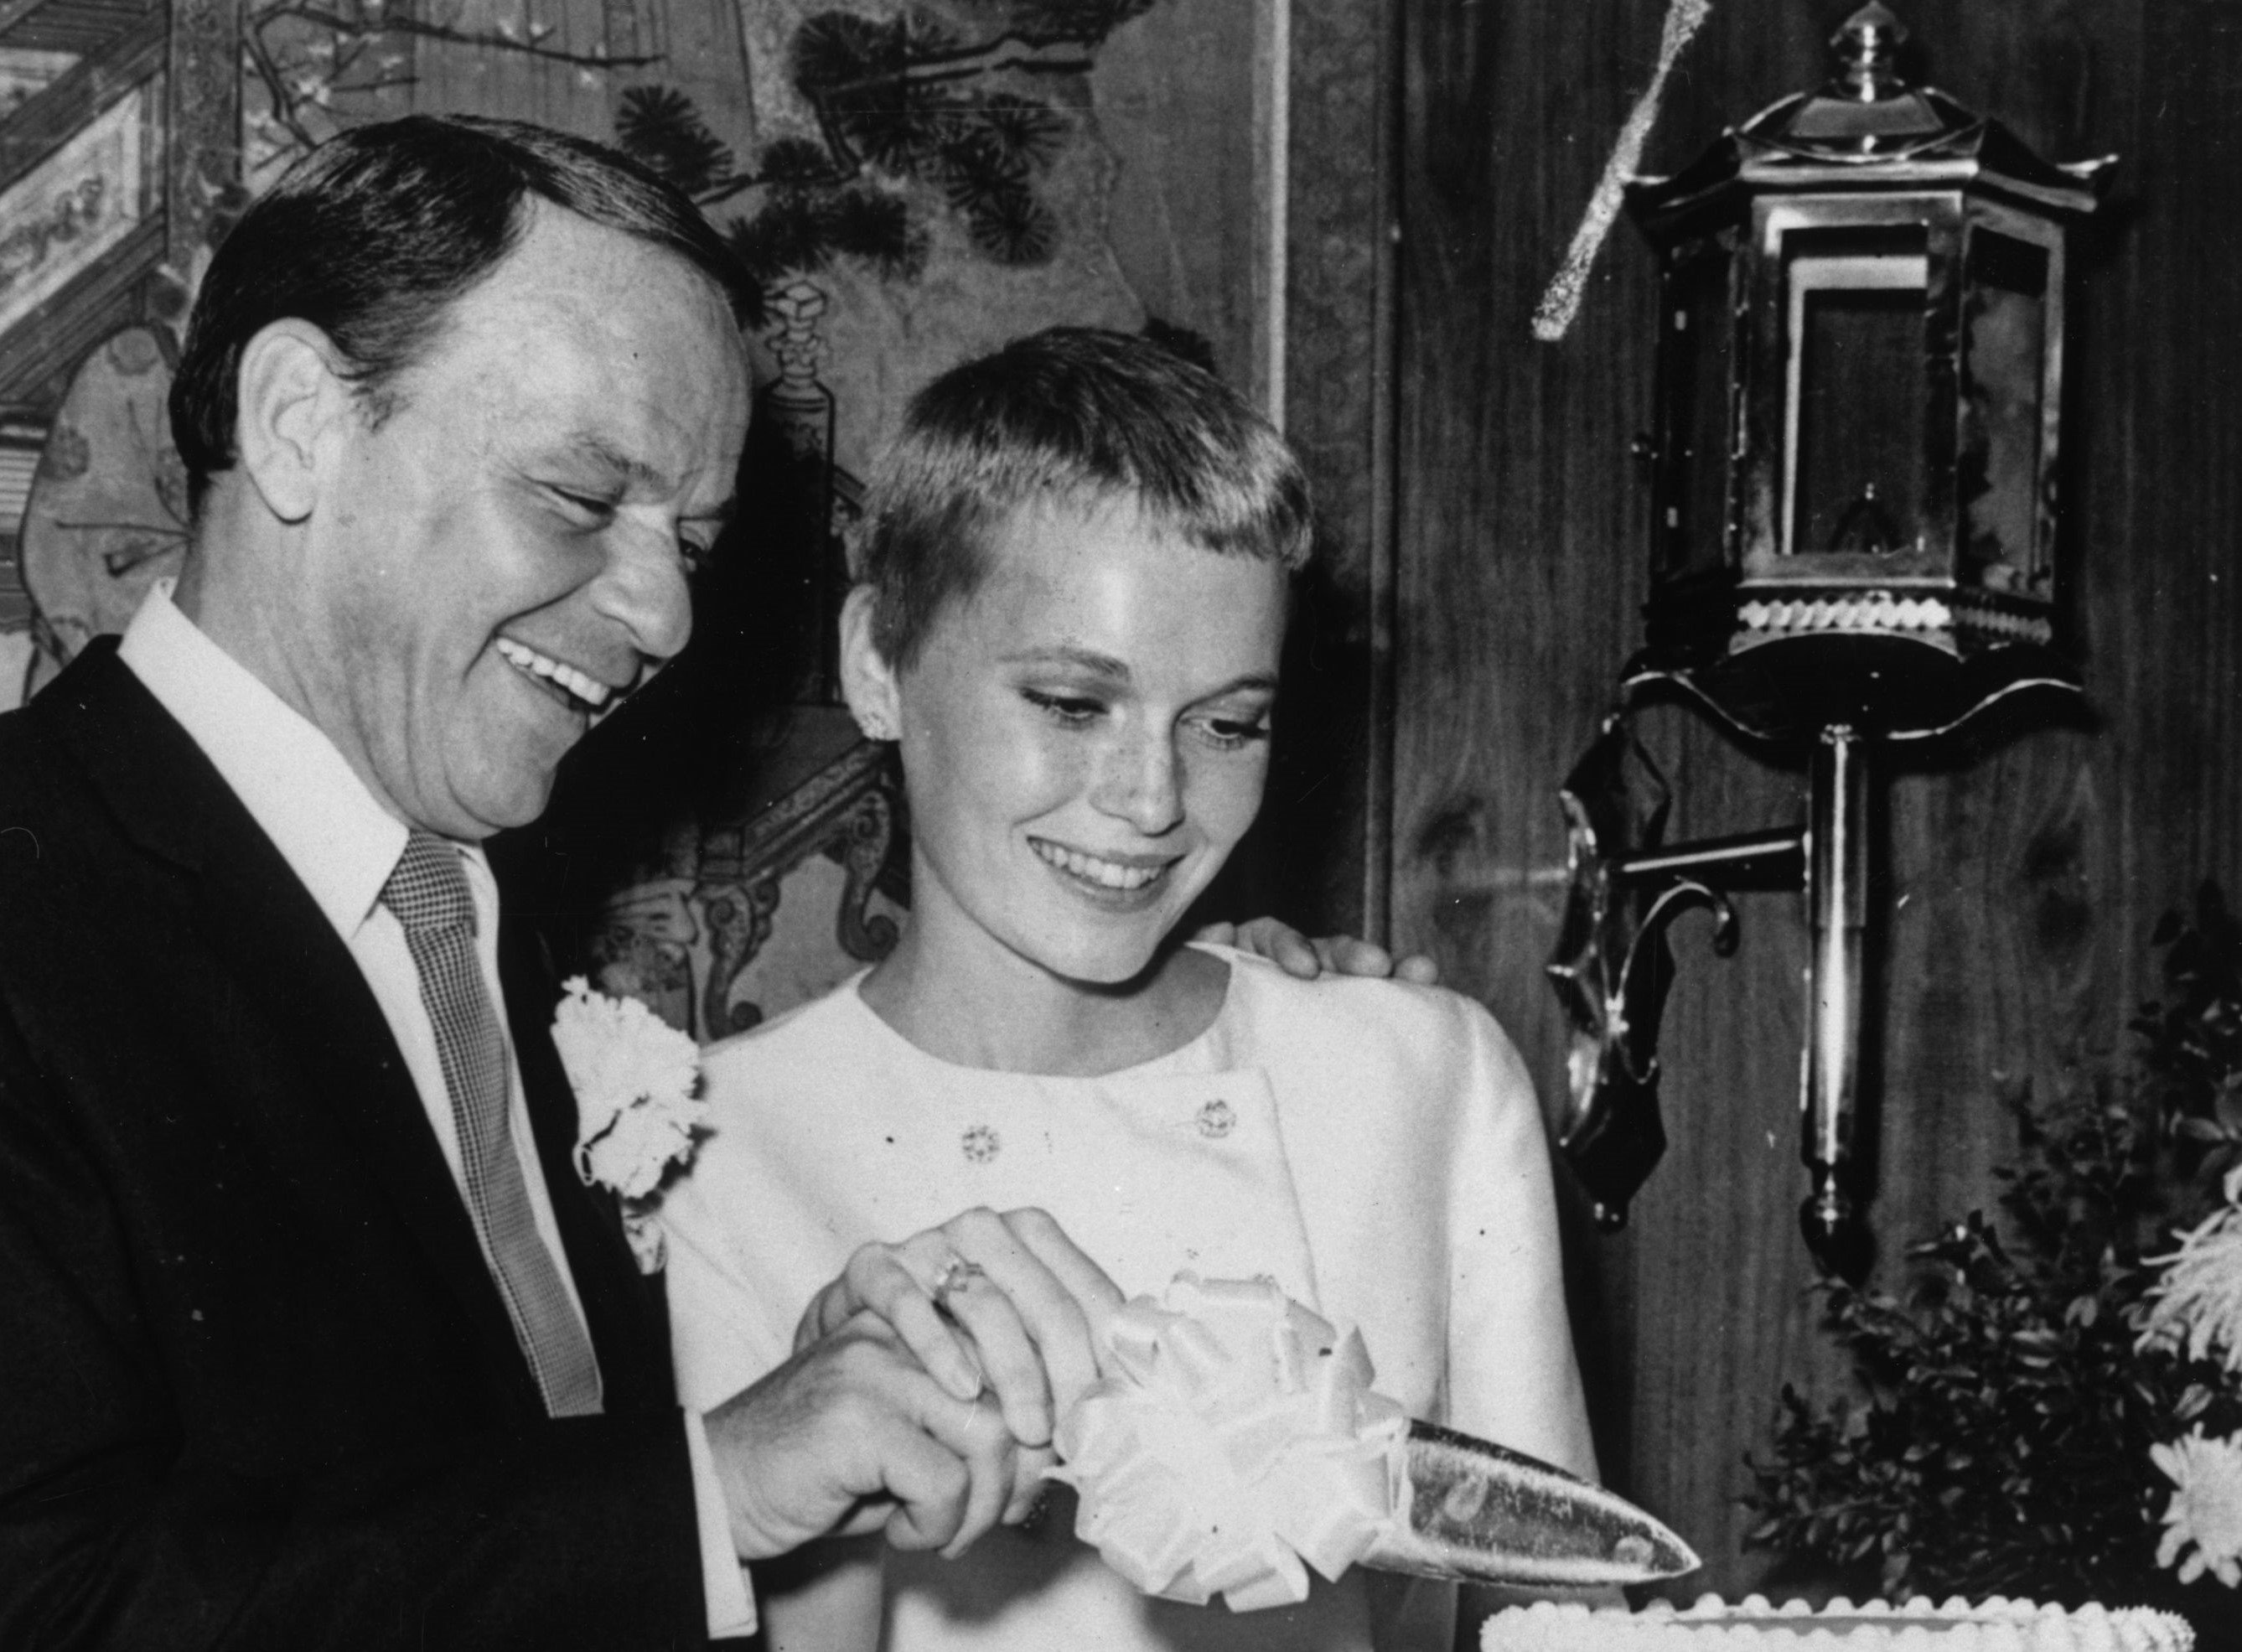 A black and white photo of Frank Sinatra and Mia Farrow cutting a cake together.